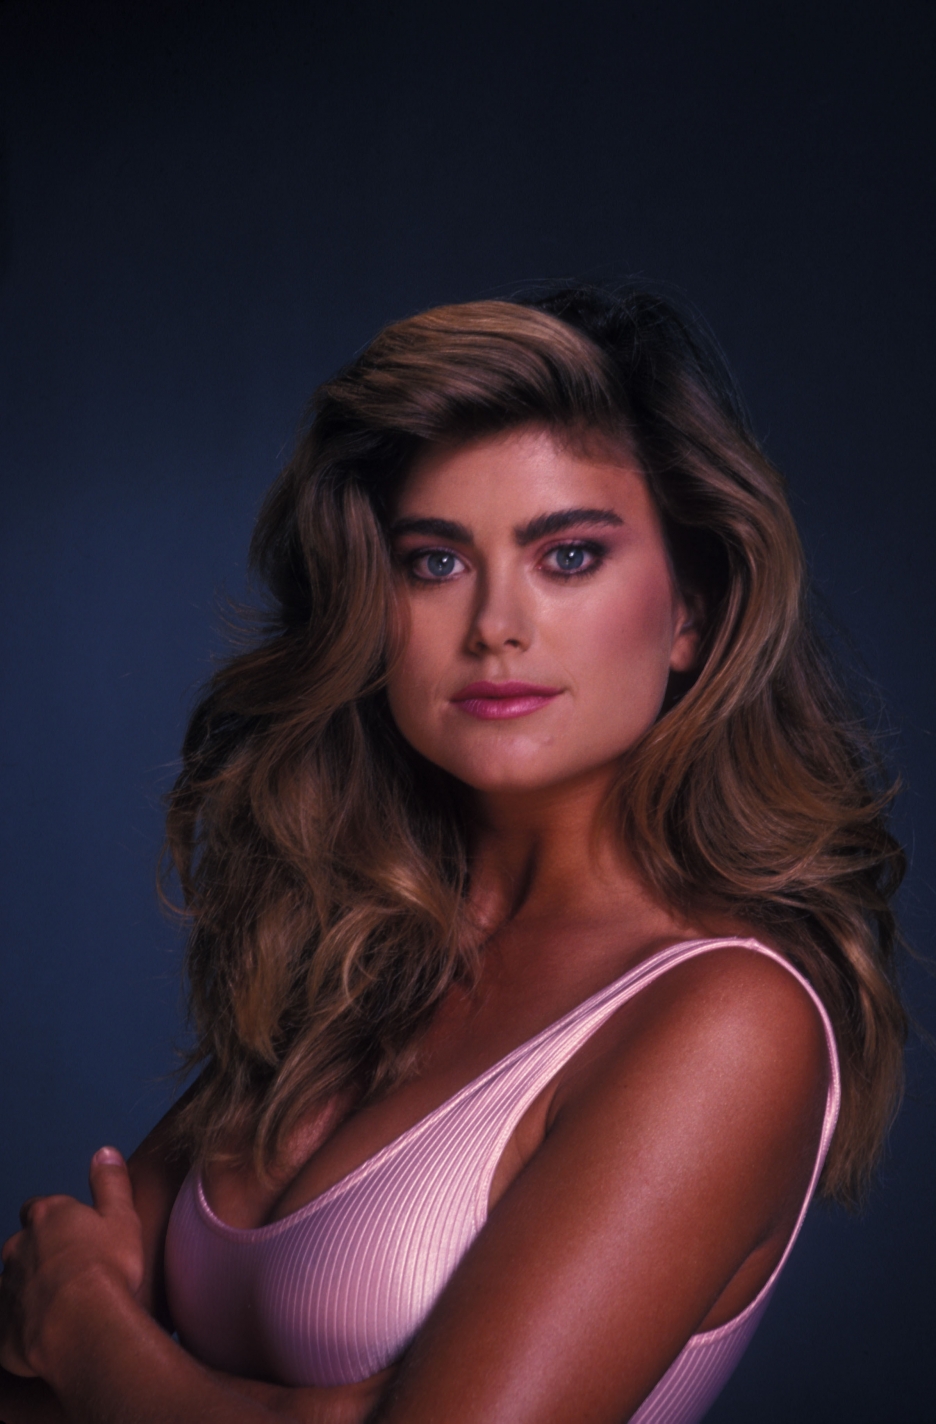 KATHY IRELAND - Color 8 x 10 - PINUP - in Person $33.00 - PicClick